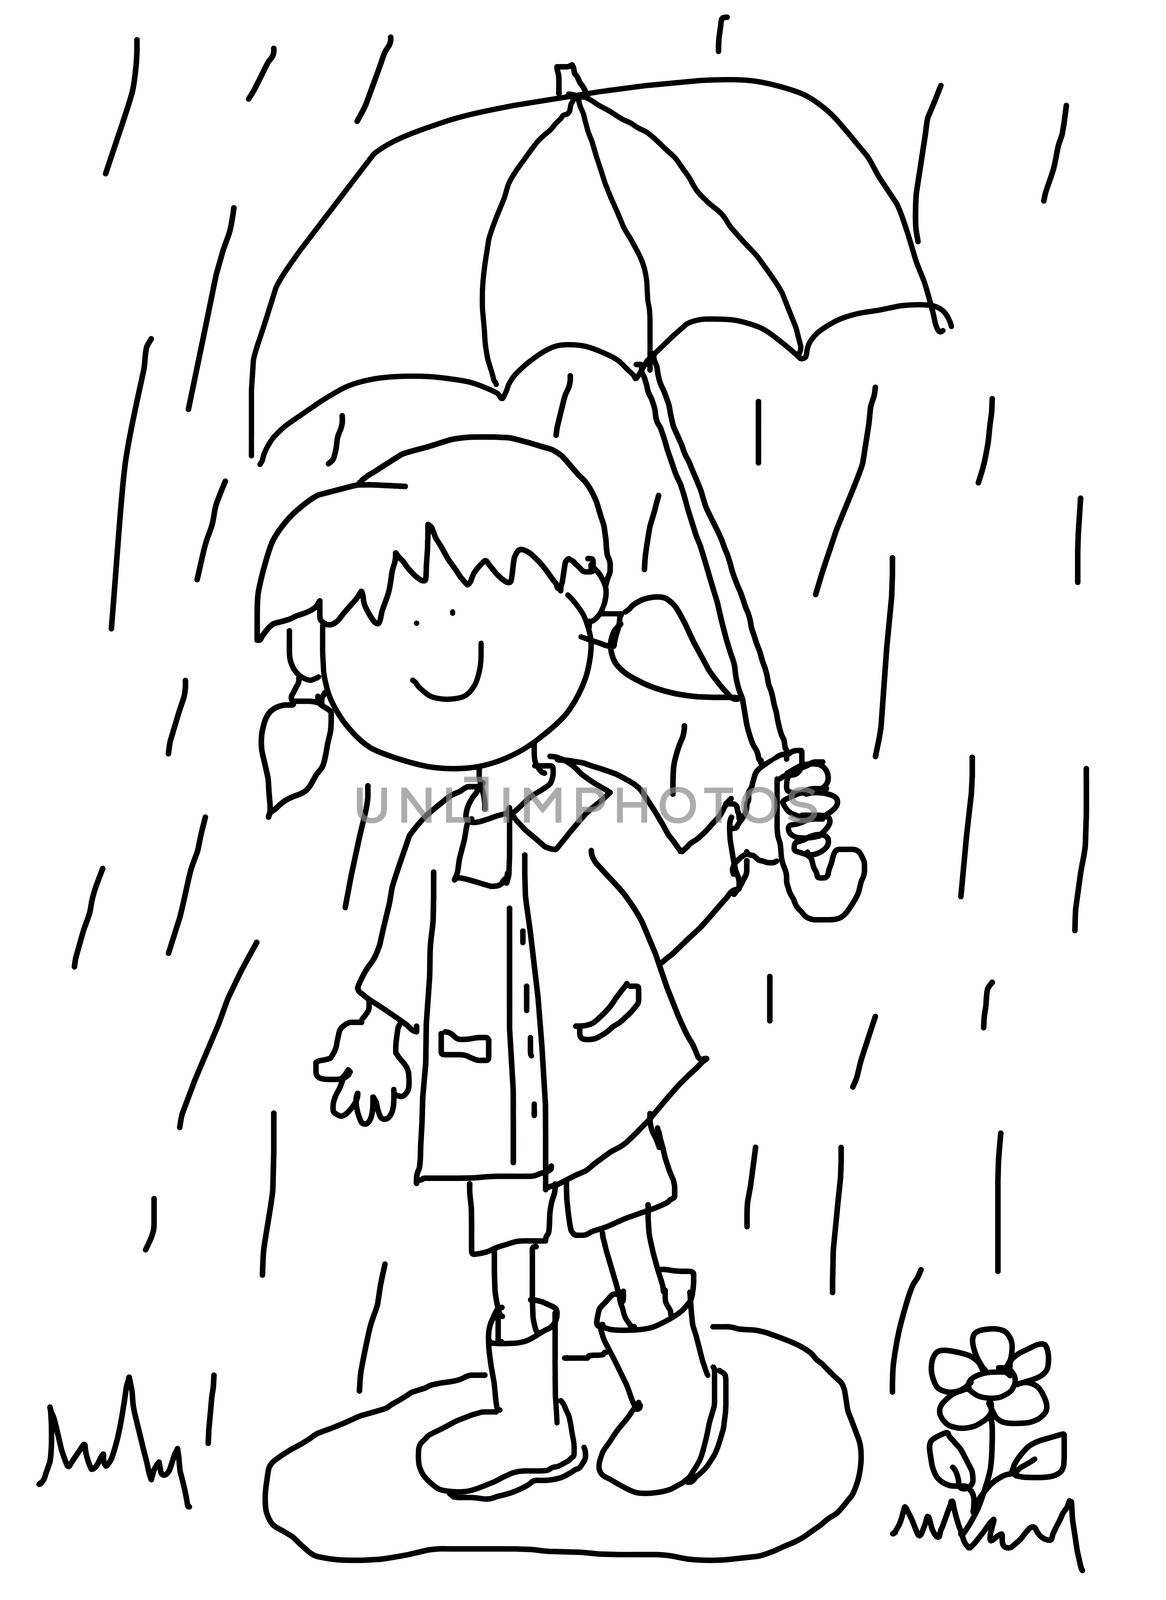 Large childlike cartoon character: little girl with a big smile holding an umbrella and playing in the rain by stepping into a puddle with her rubber boots.